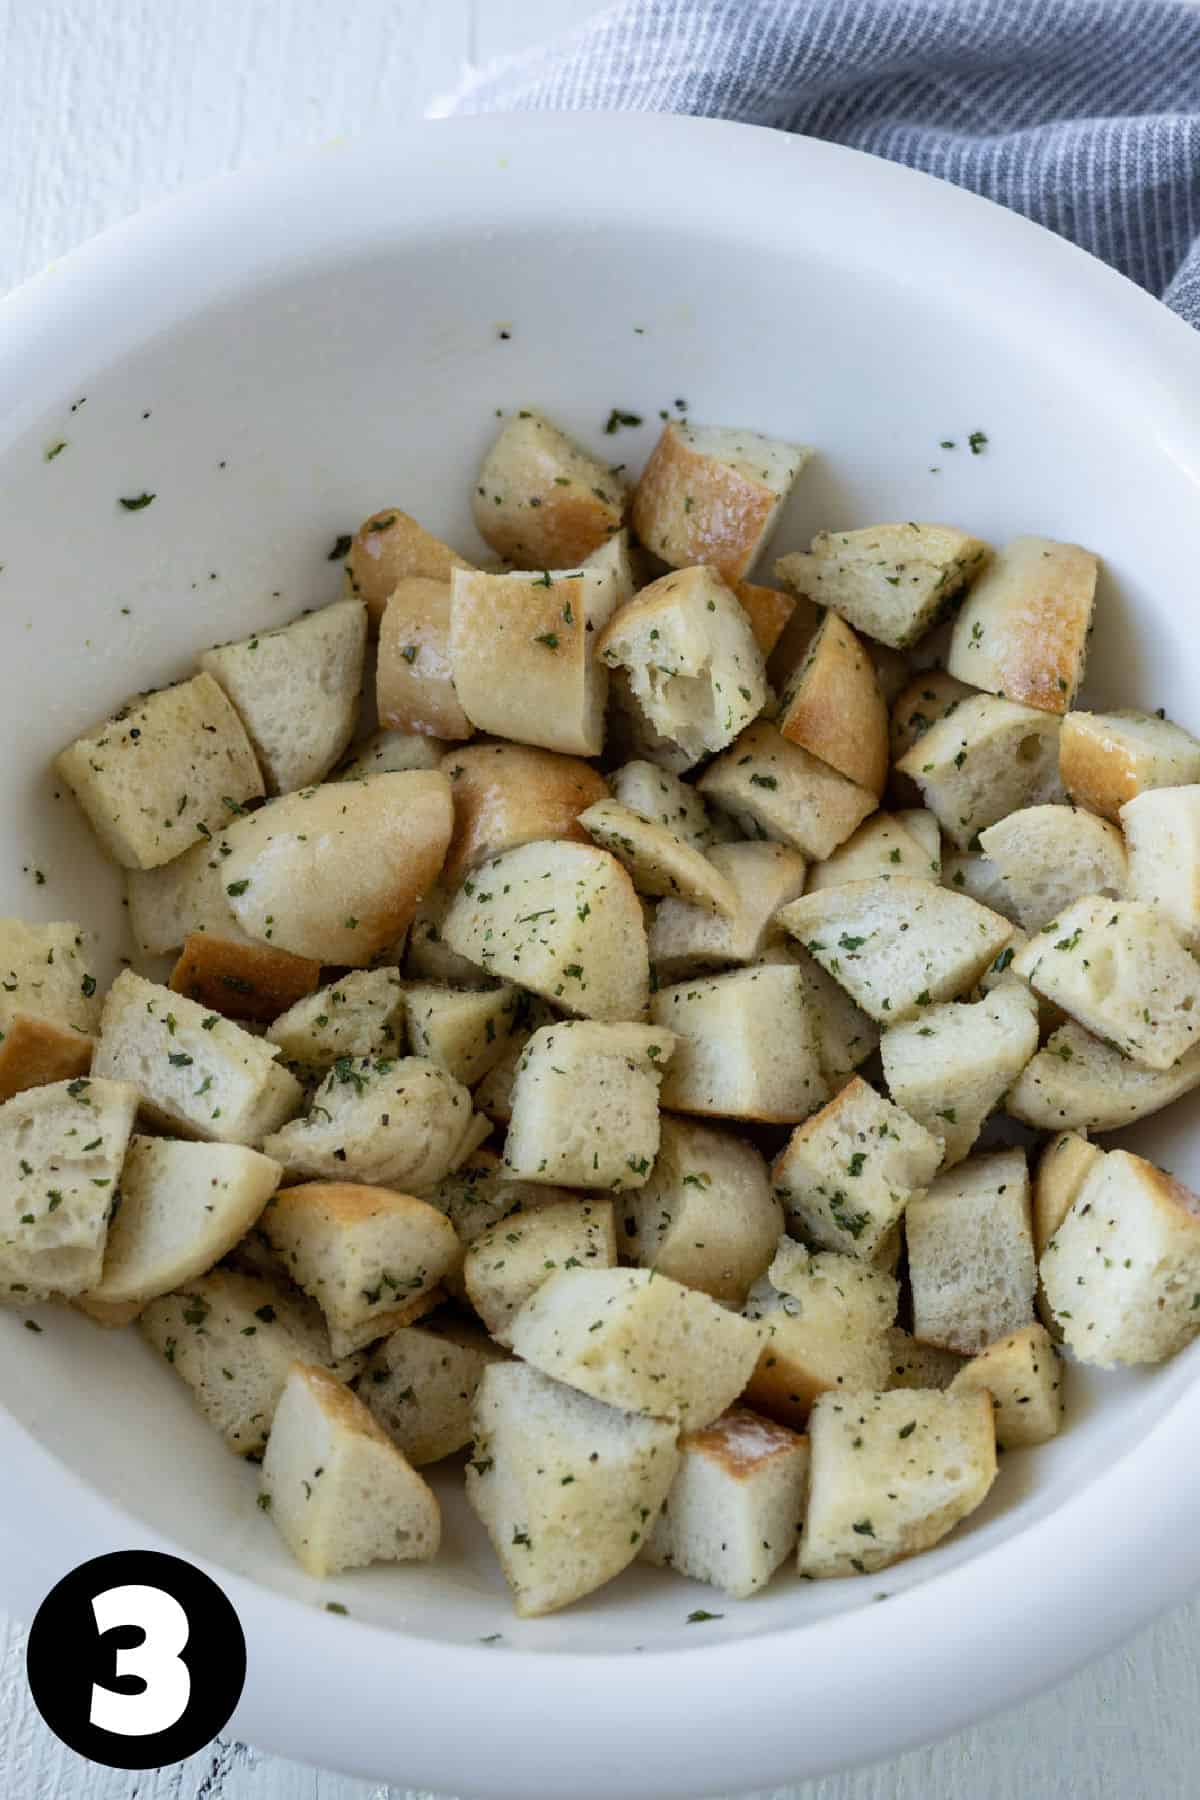 Bread cubes coated in garlic herb butter in a white bowl.